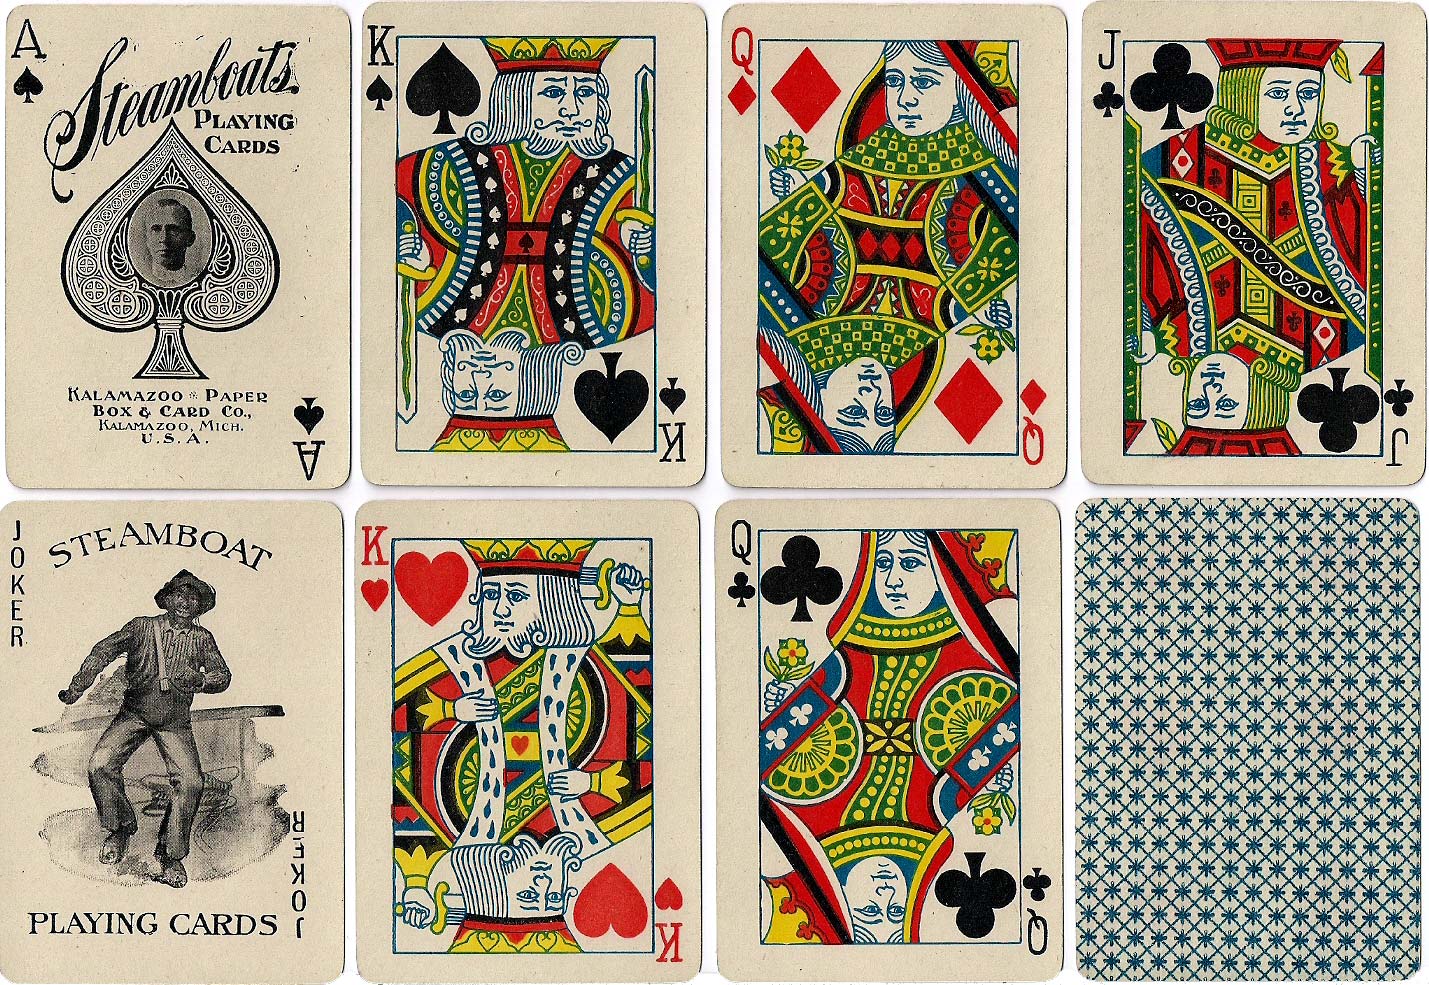 Steamboats #66 playing cards manufactured by the Kalamazoo Paper Box & Card Co., c.1903